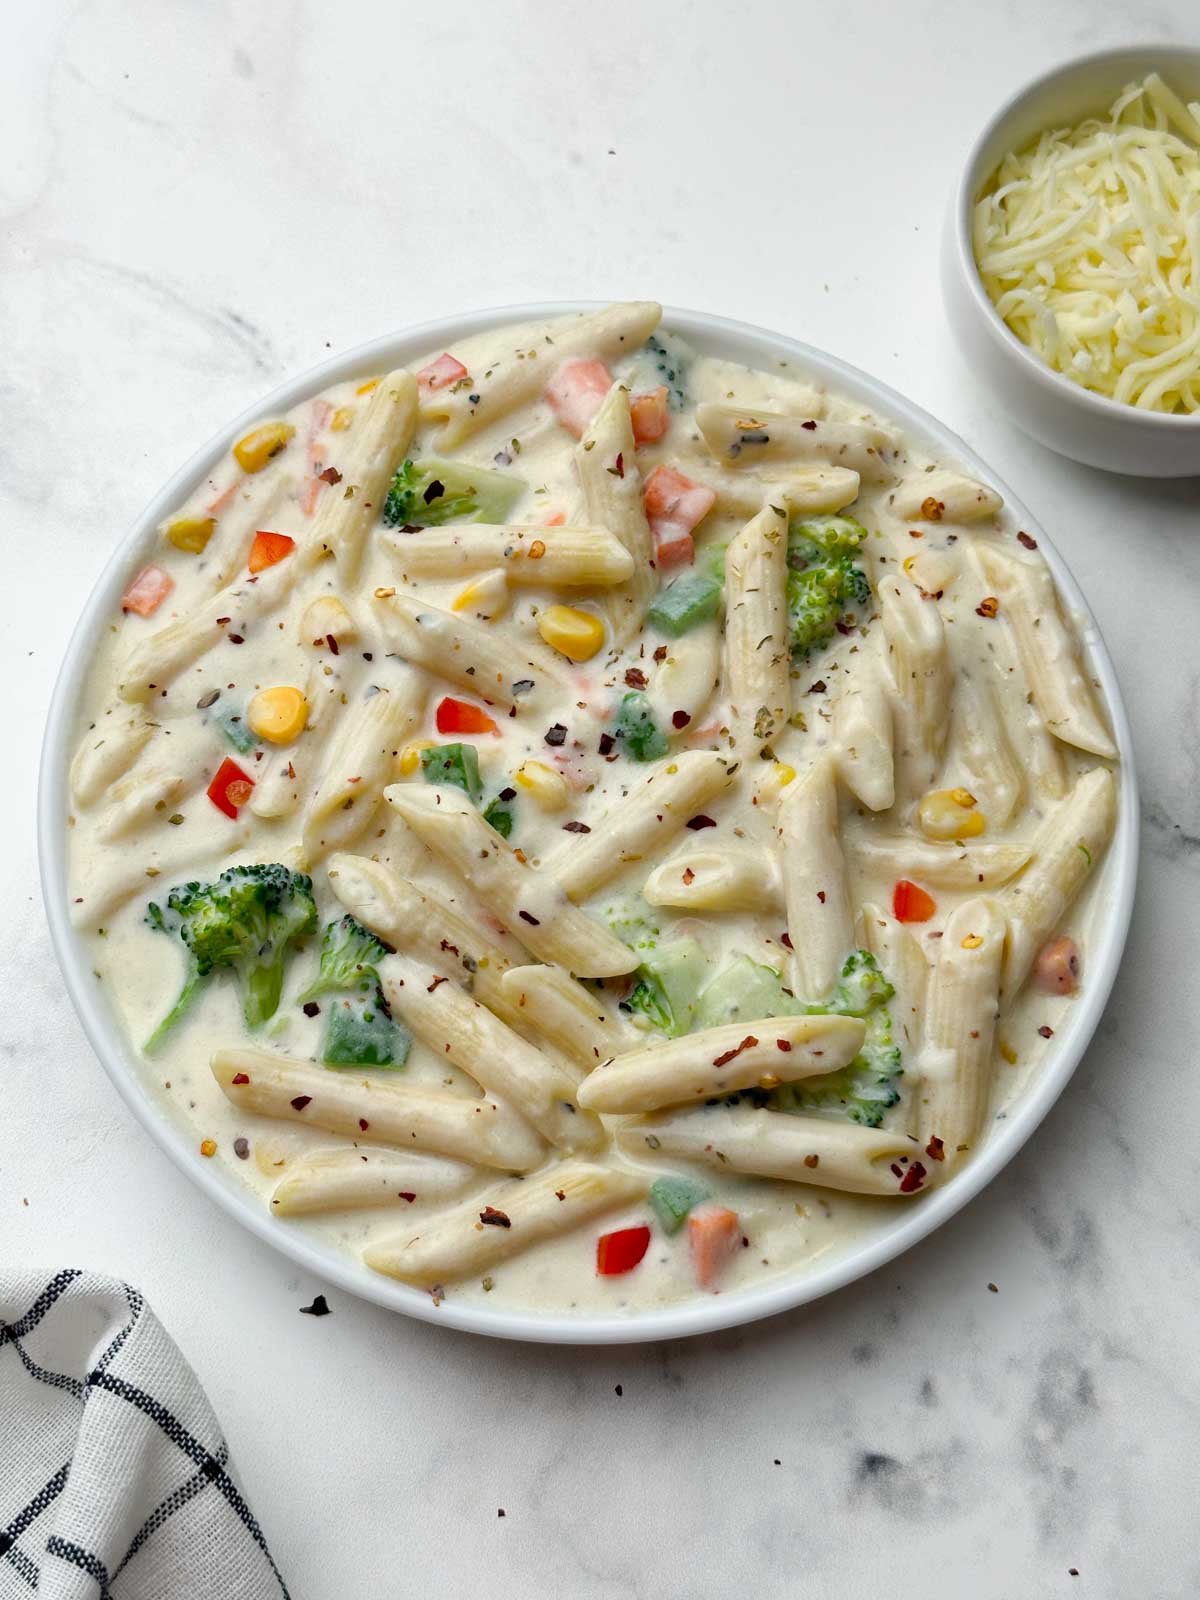 white sauce pasta (bechamel sauce pasta) served in a plate with cheese on the side